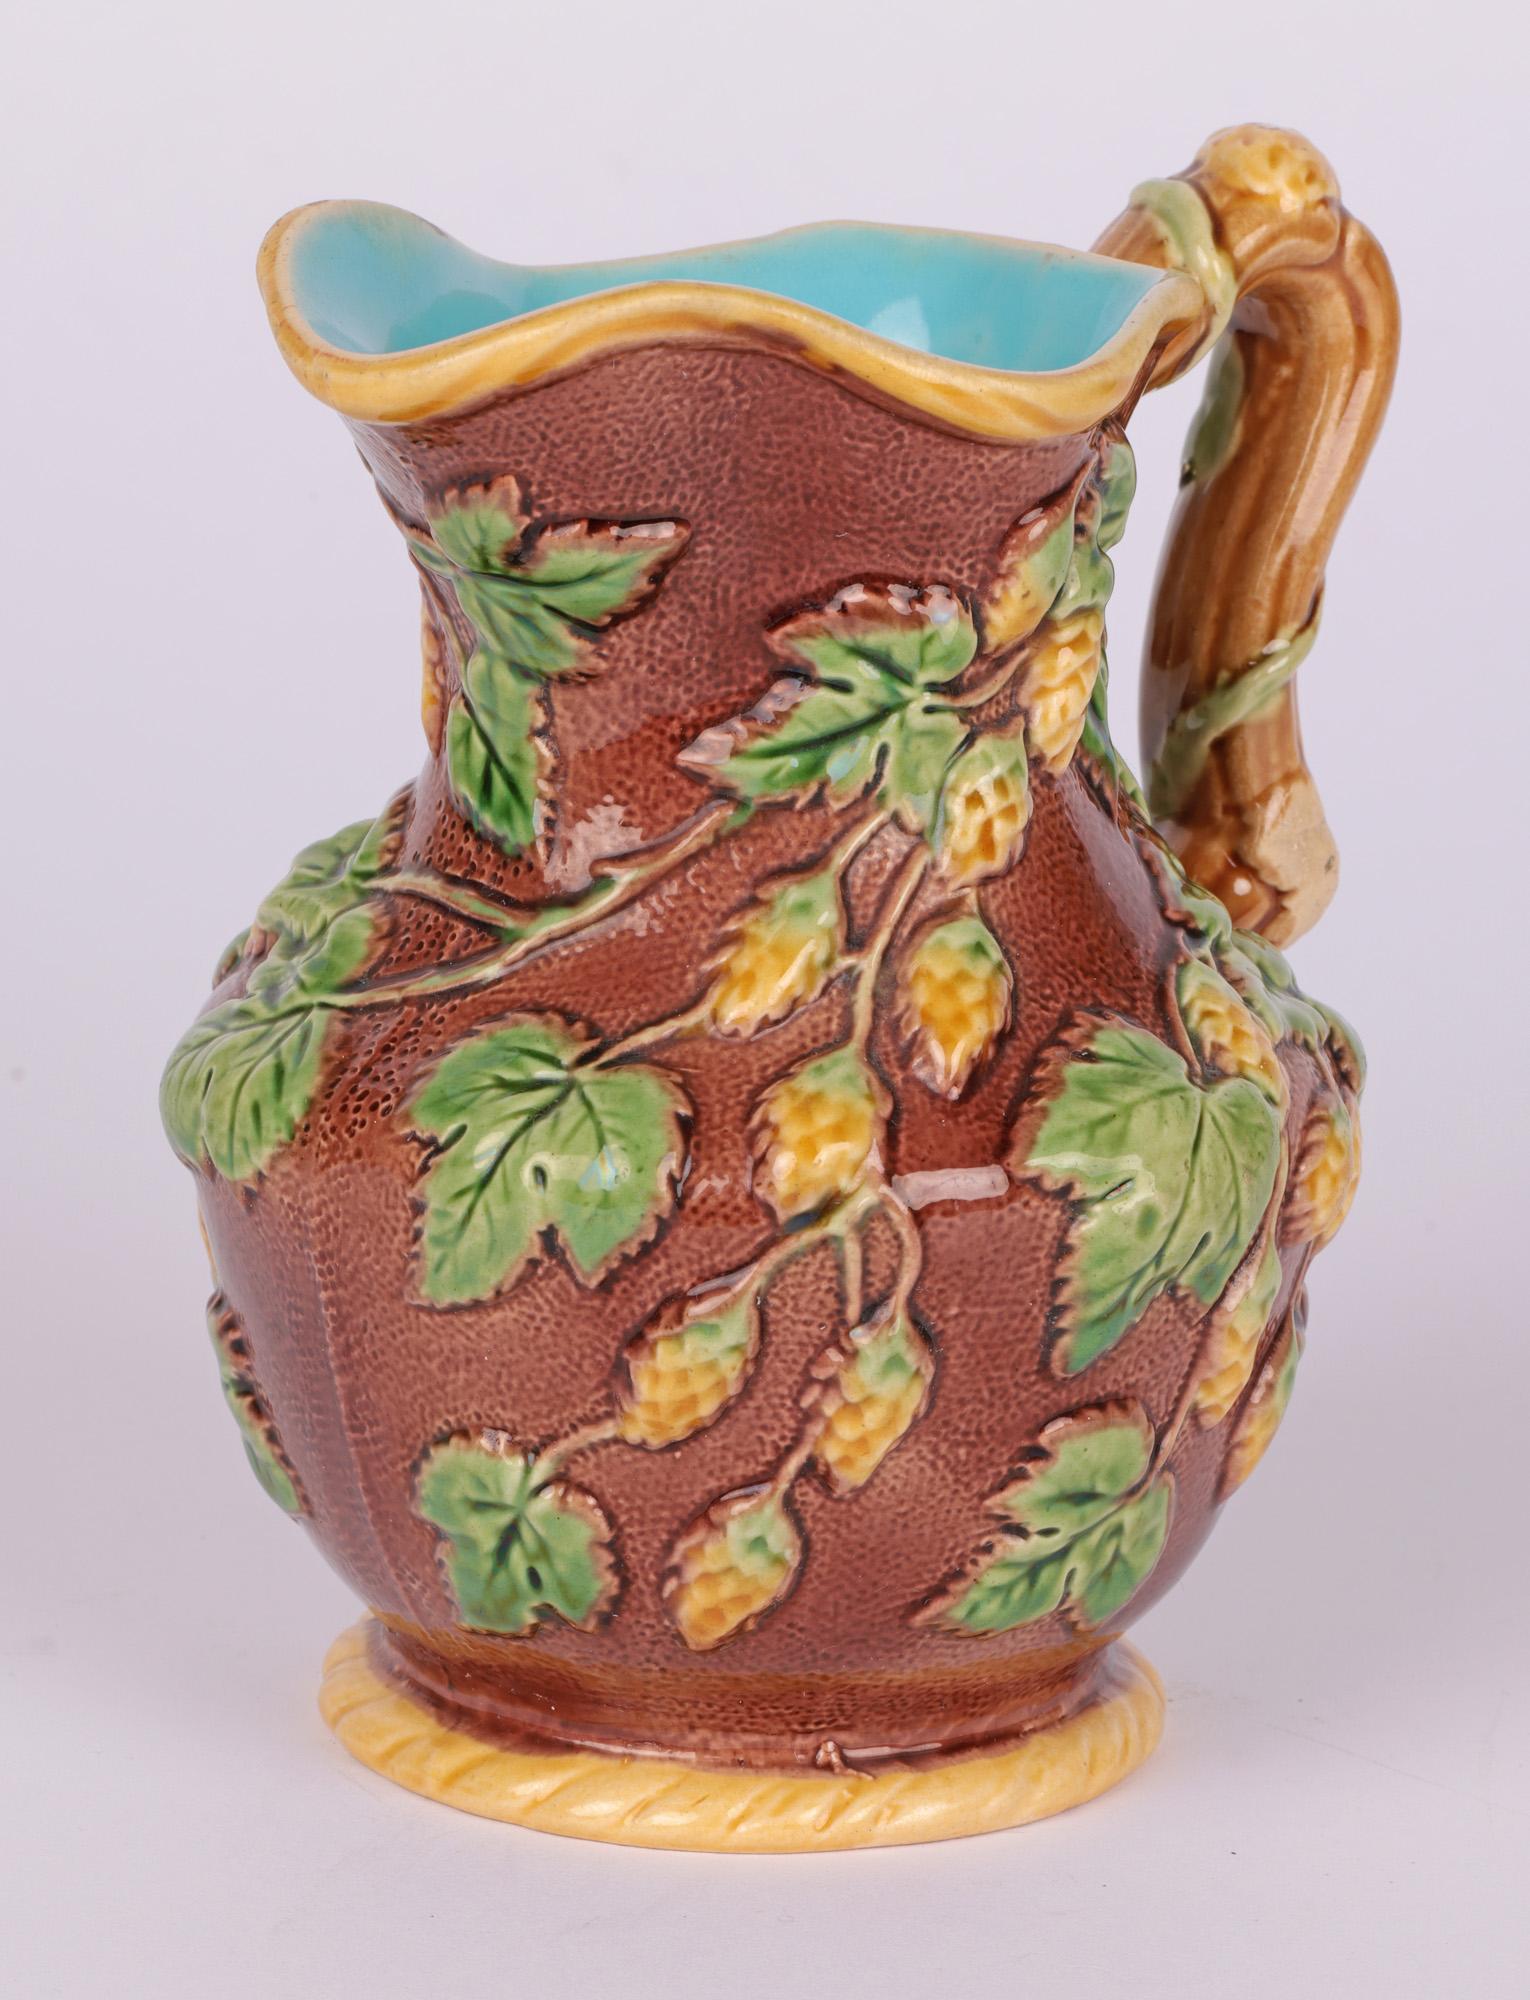 Mid-19th Century Minton Majolica Pottery Ale Jug Decorated with Hops